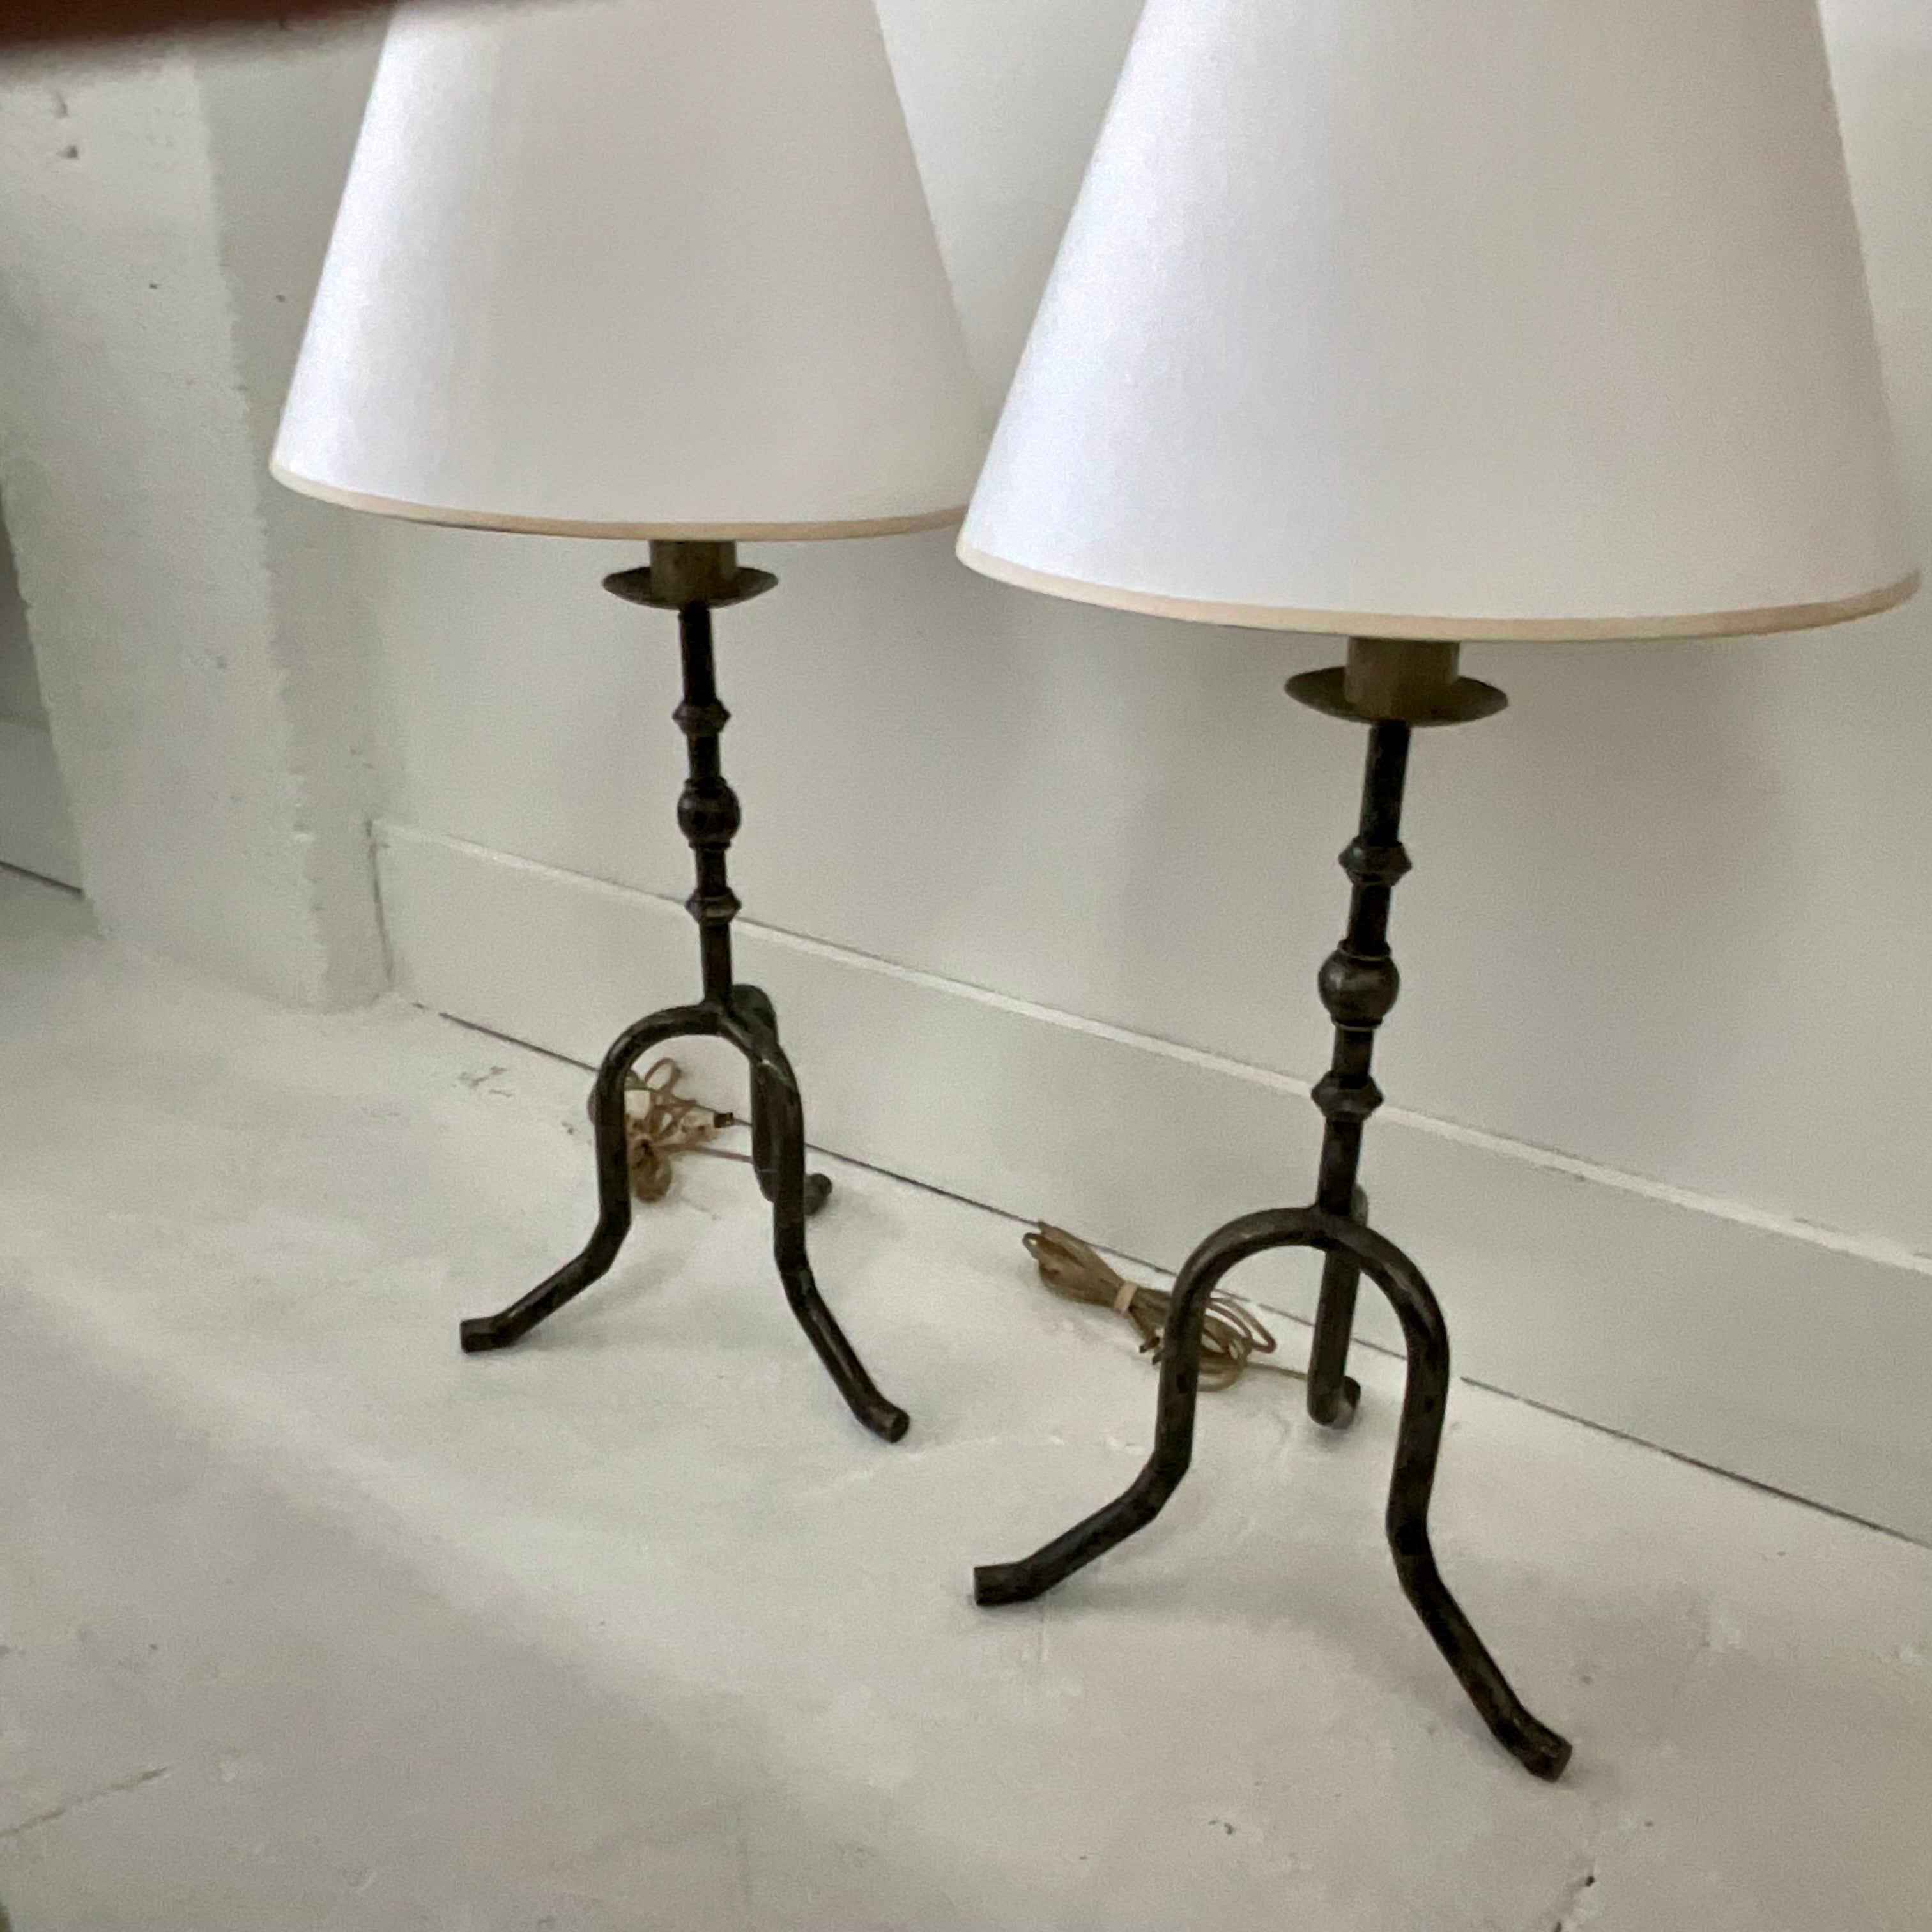 Silvered Vintage metal candlesticks lamps with a silvered finished.  Original wiring.  Measure it 27” to the top of the socket.